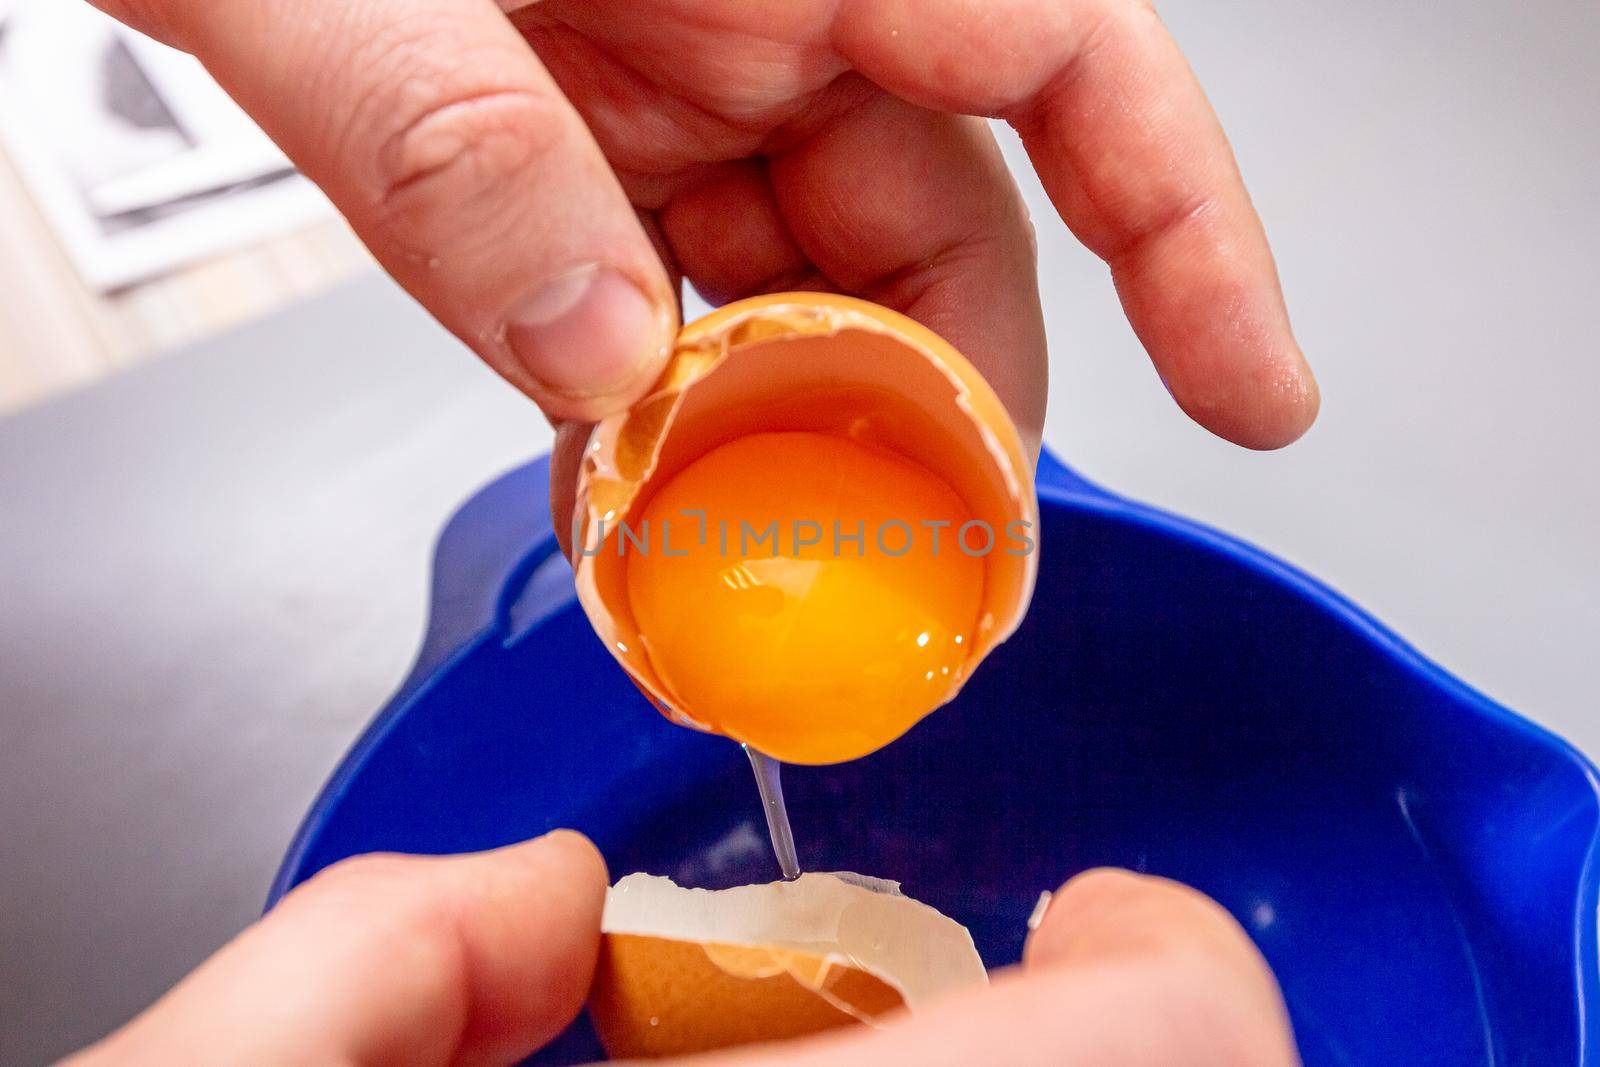 The cook separates the egg yolk from the egg white in the shell by Milanchikov